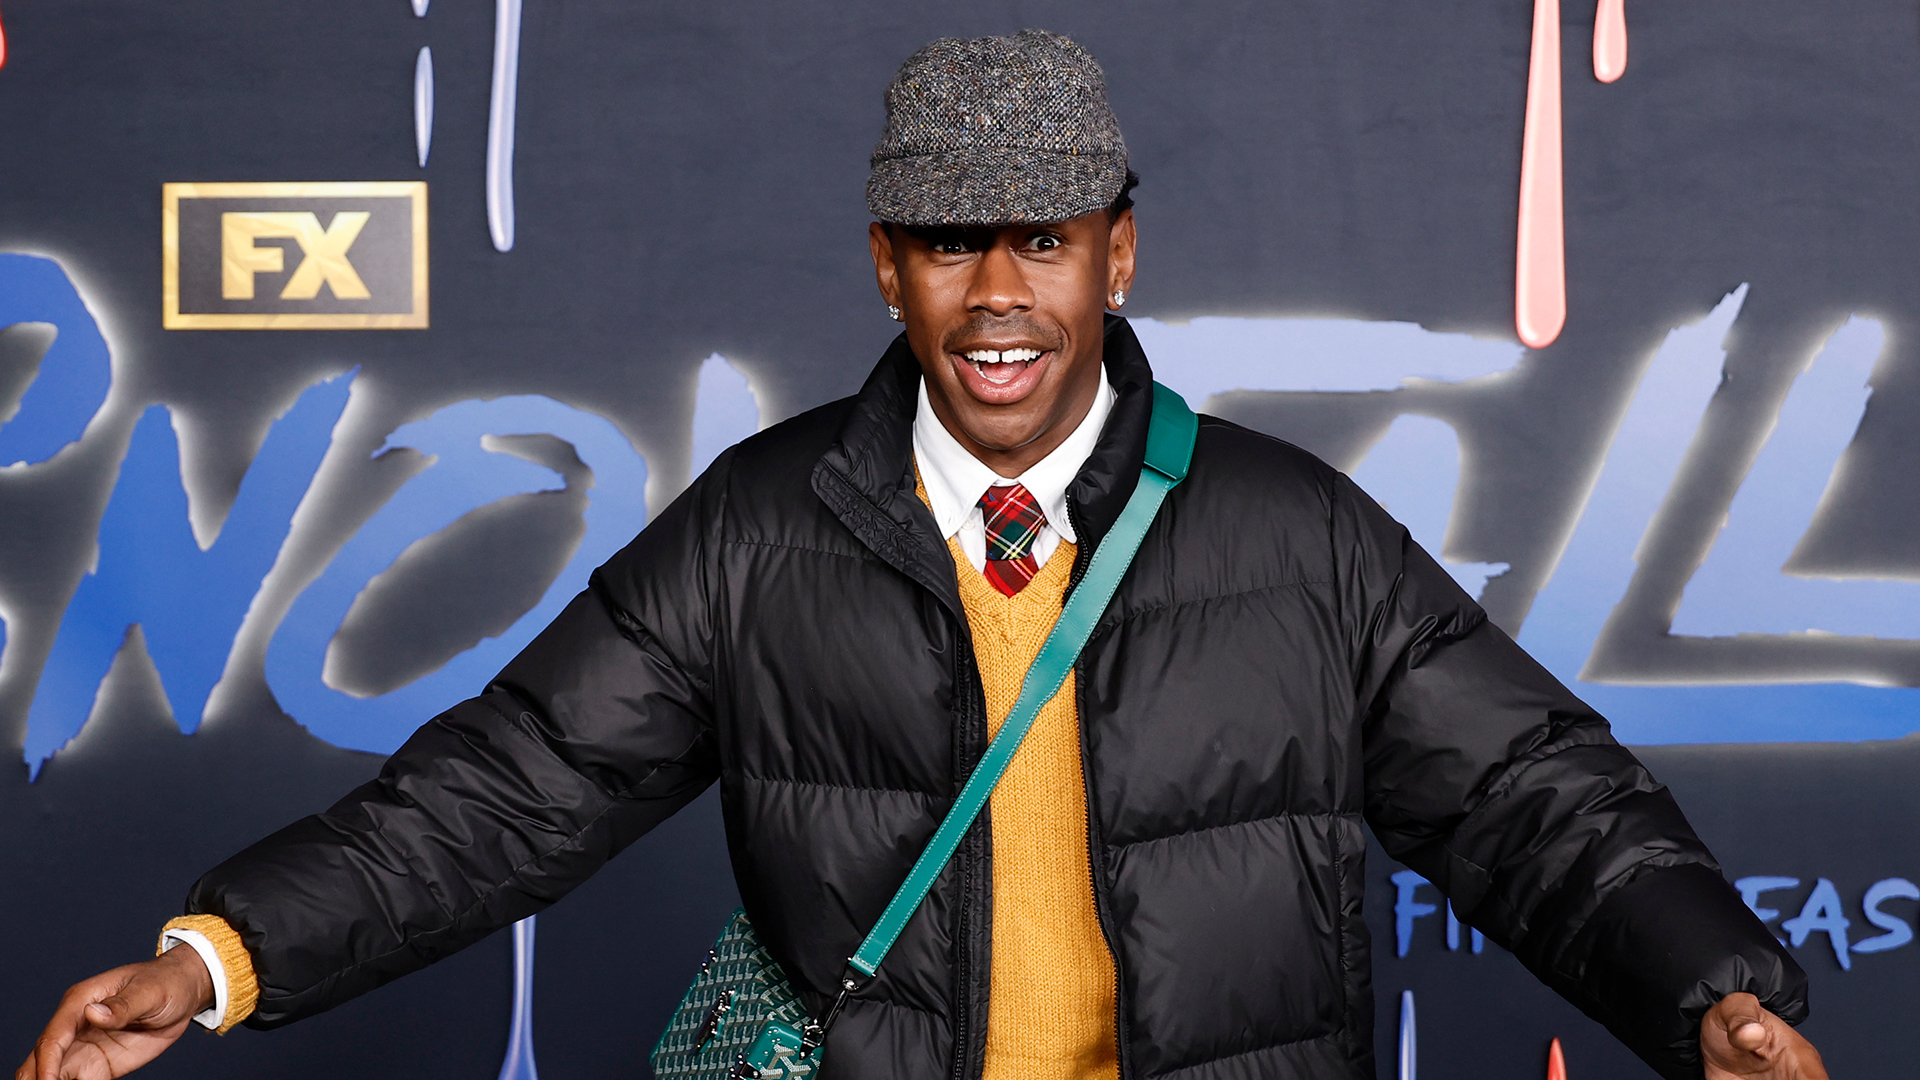 Tyler, the Creator Drops 'Wolf' Instrumentals and Merch to